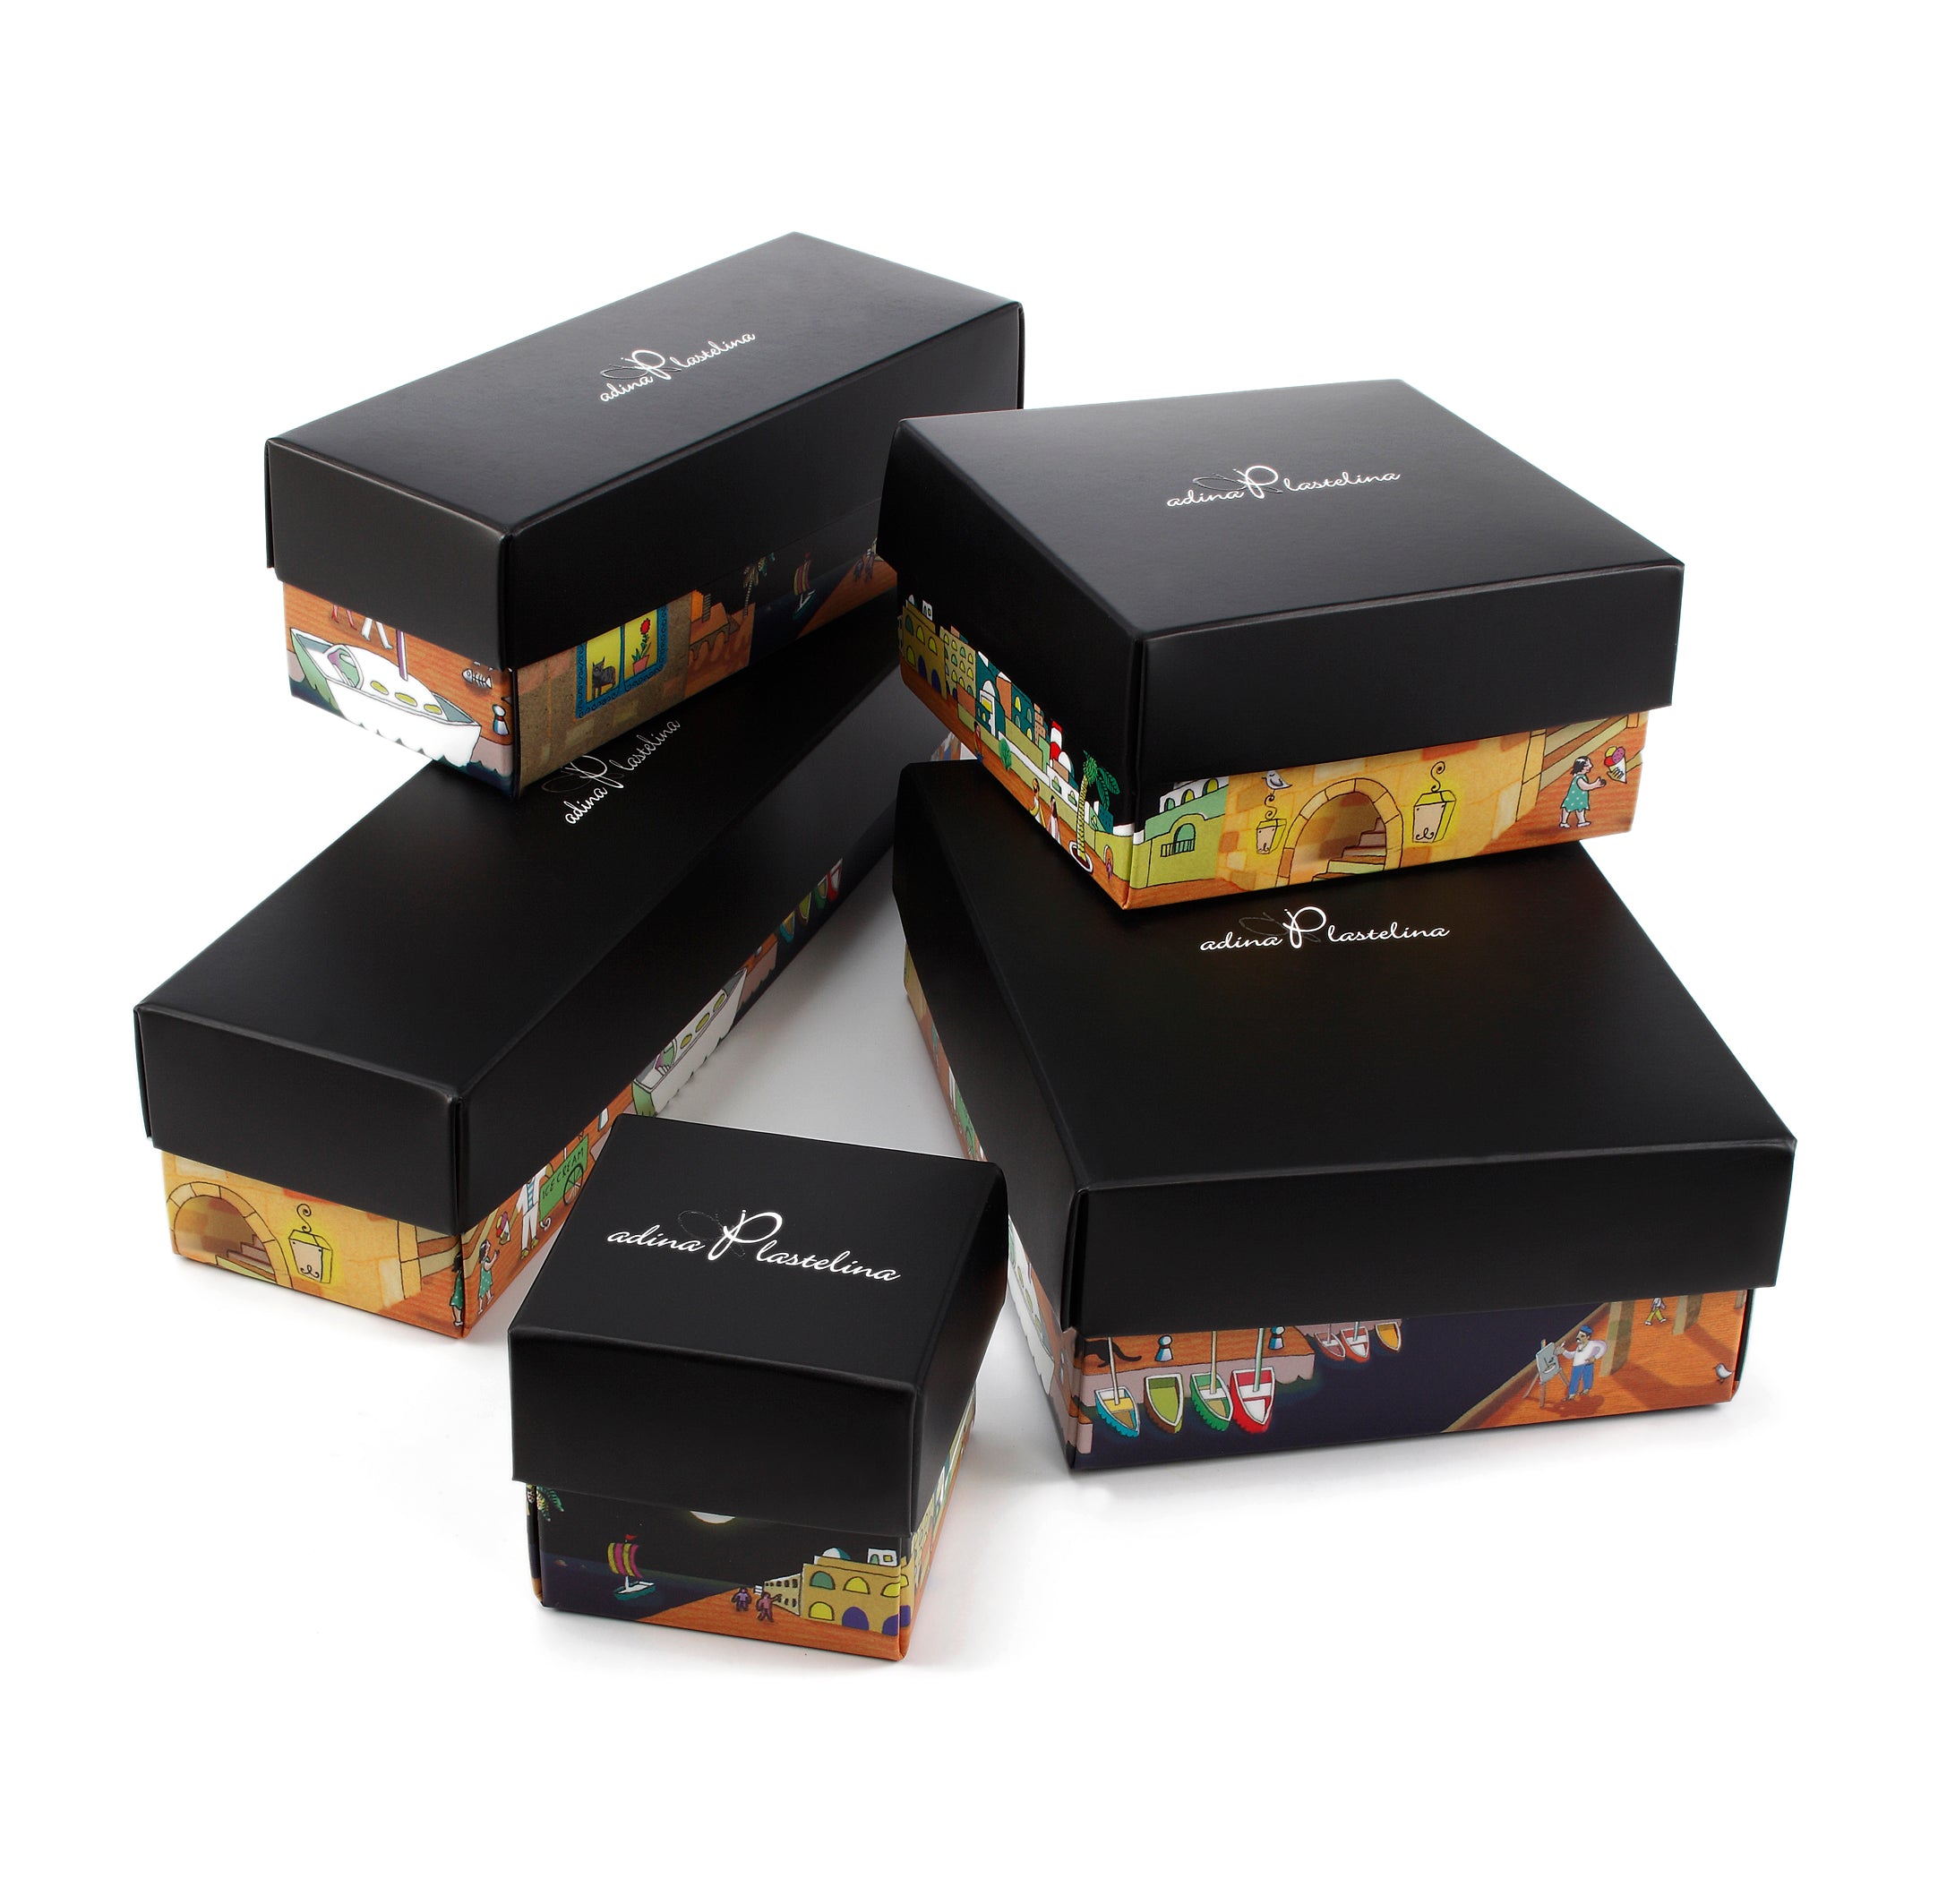 A collection of black salamander shoe boxes of various sizes, featuring colorful designs on the sides, arranged around a Gold Plated Silver Cat Necklace Pet Lovers Gift on a white background.